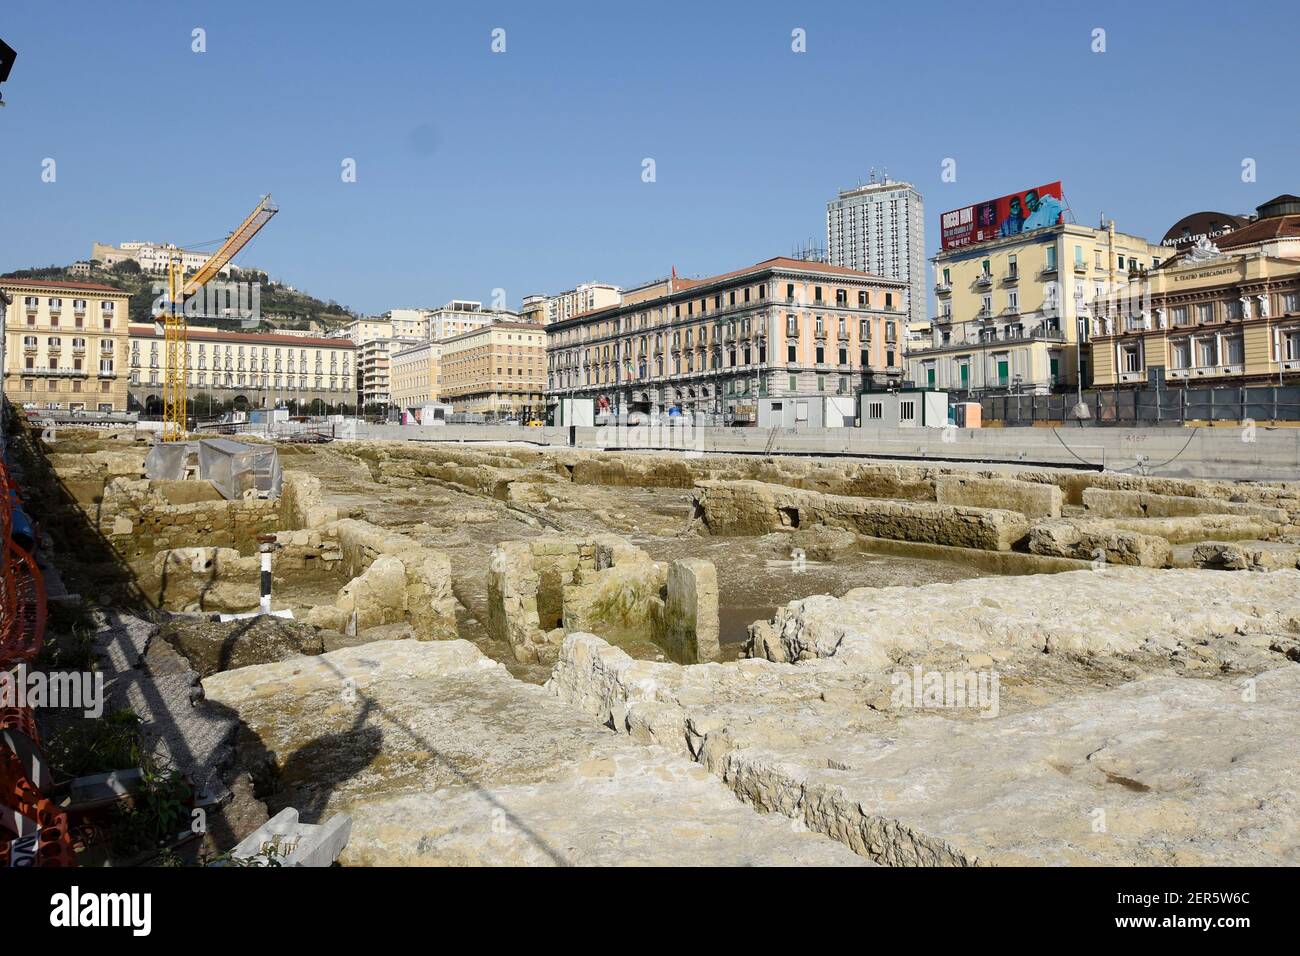 Ruins of an ancient city emerged in the underground excavation works in Naples, Italy. Stock Photo